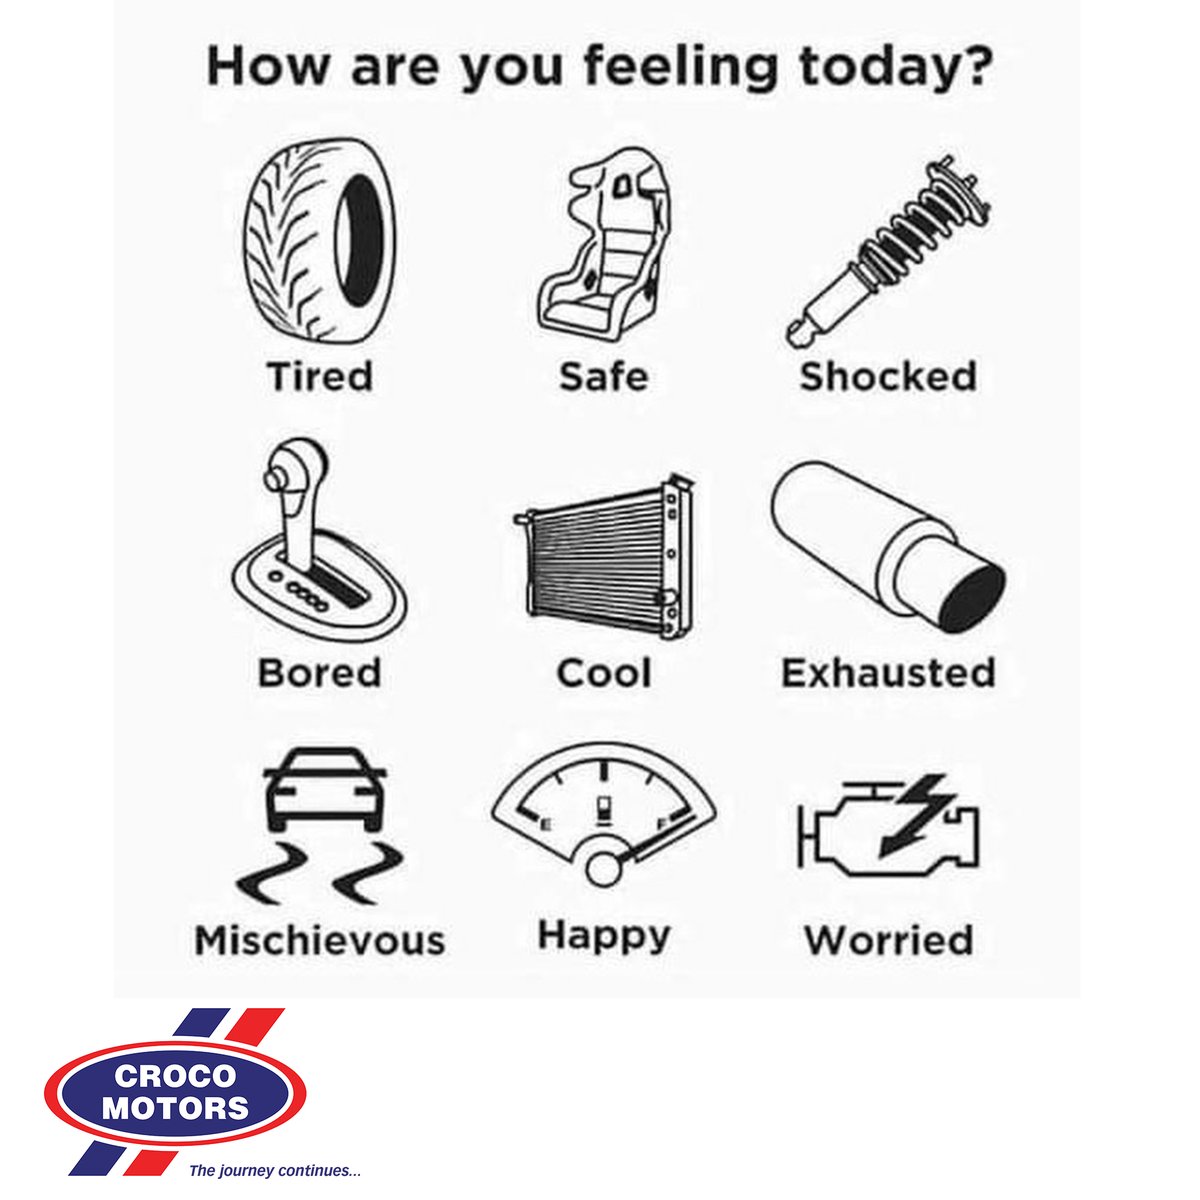 How are you feeling today?. Comment below with the most relatable emoji. #crocomotors #harare #zimbabwe